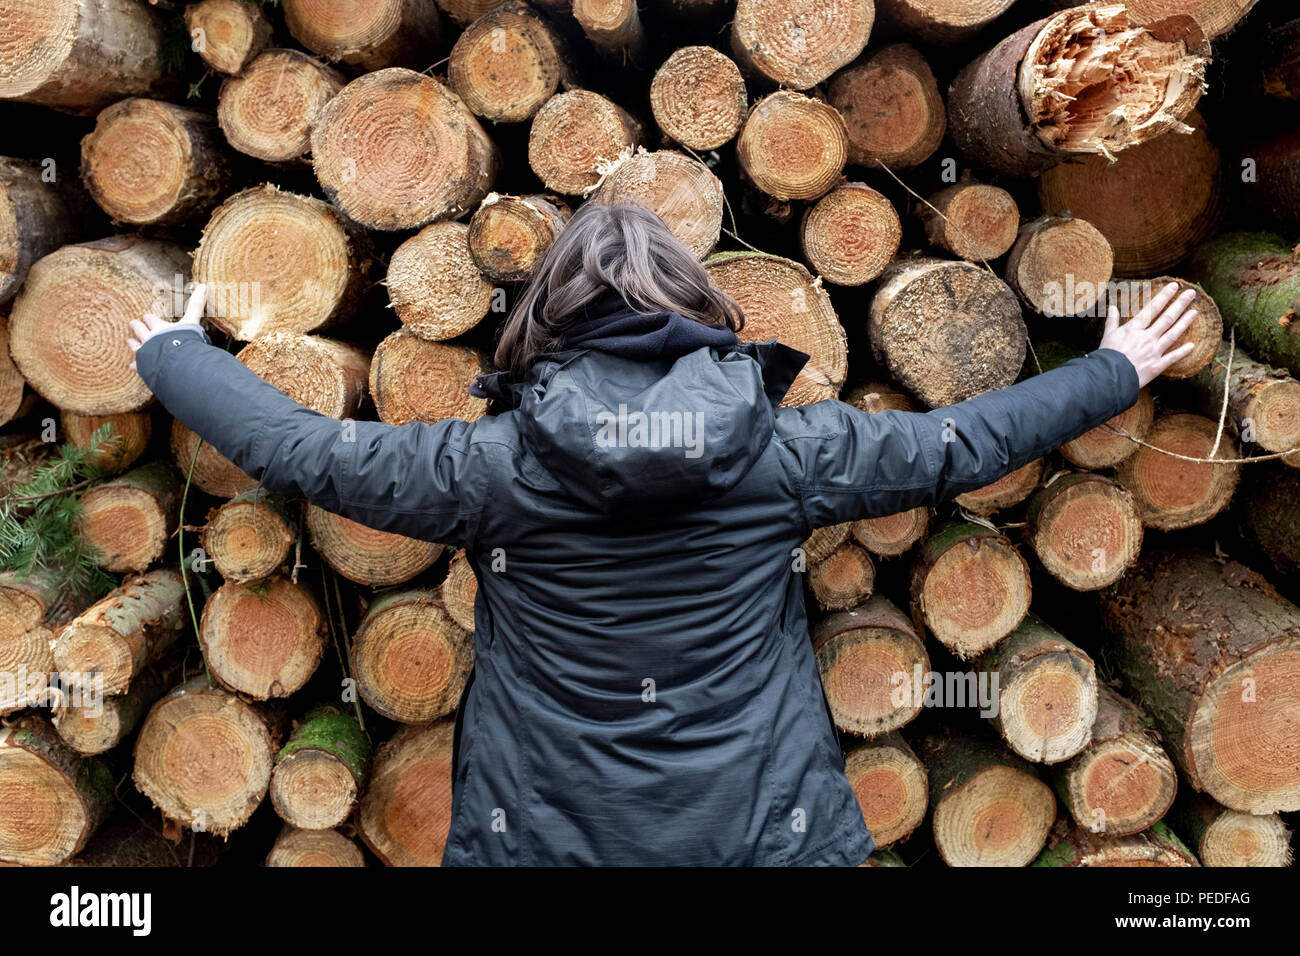 A woman with arms outstretched in front of a stack of softwood logs. Stock Photo